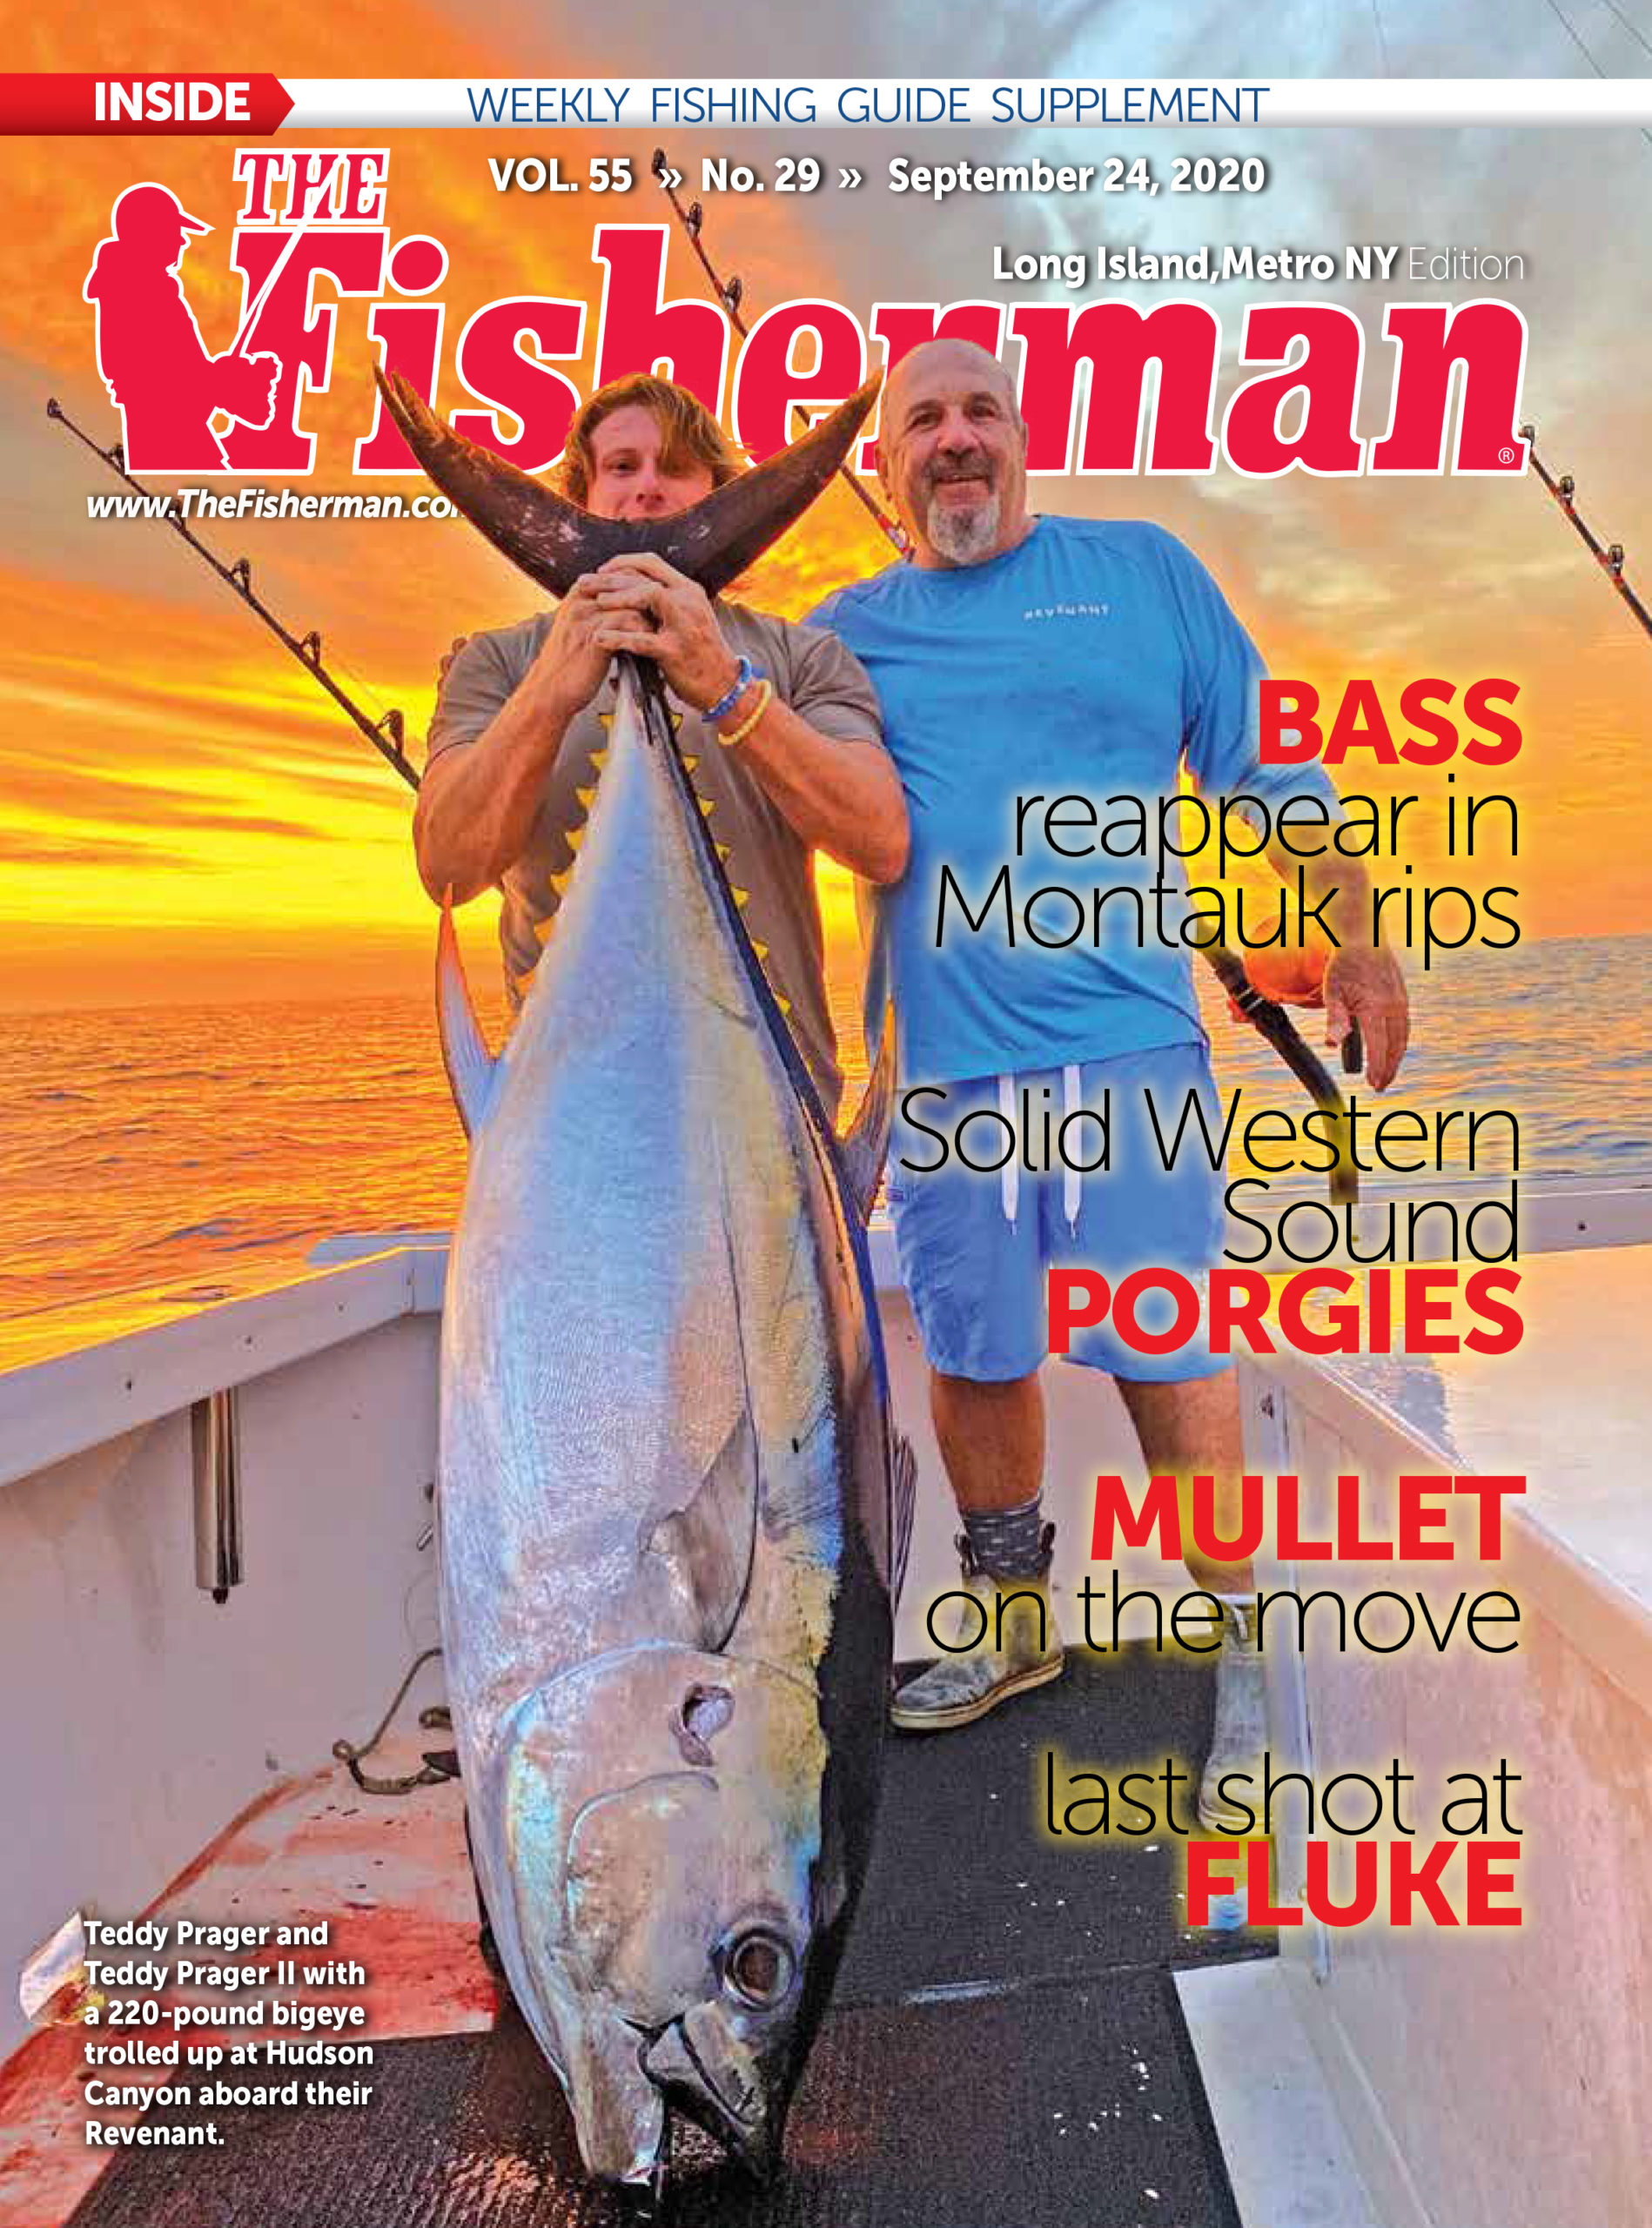 BioSpawn Continues Line Expansion with Two New Releases - Fishing Tackle  Retailer - The Business Magazine of the Sportfishing Industry